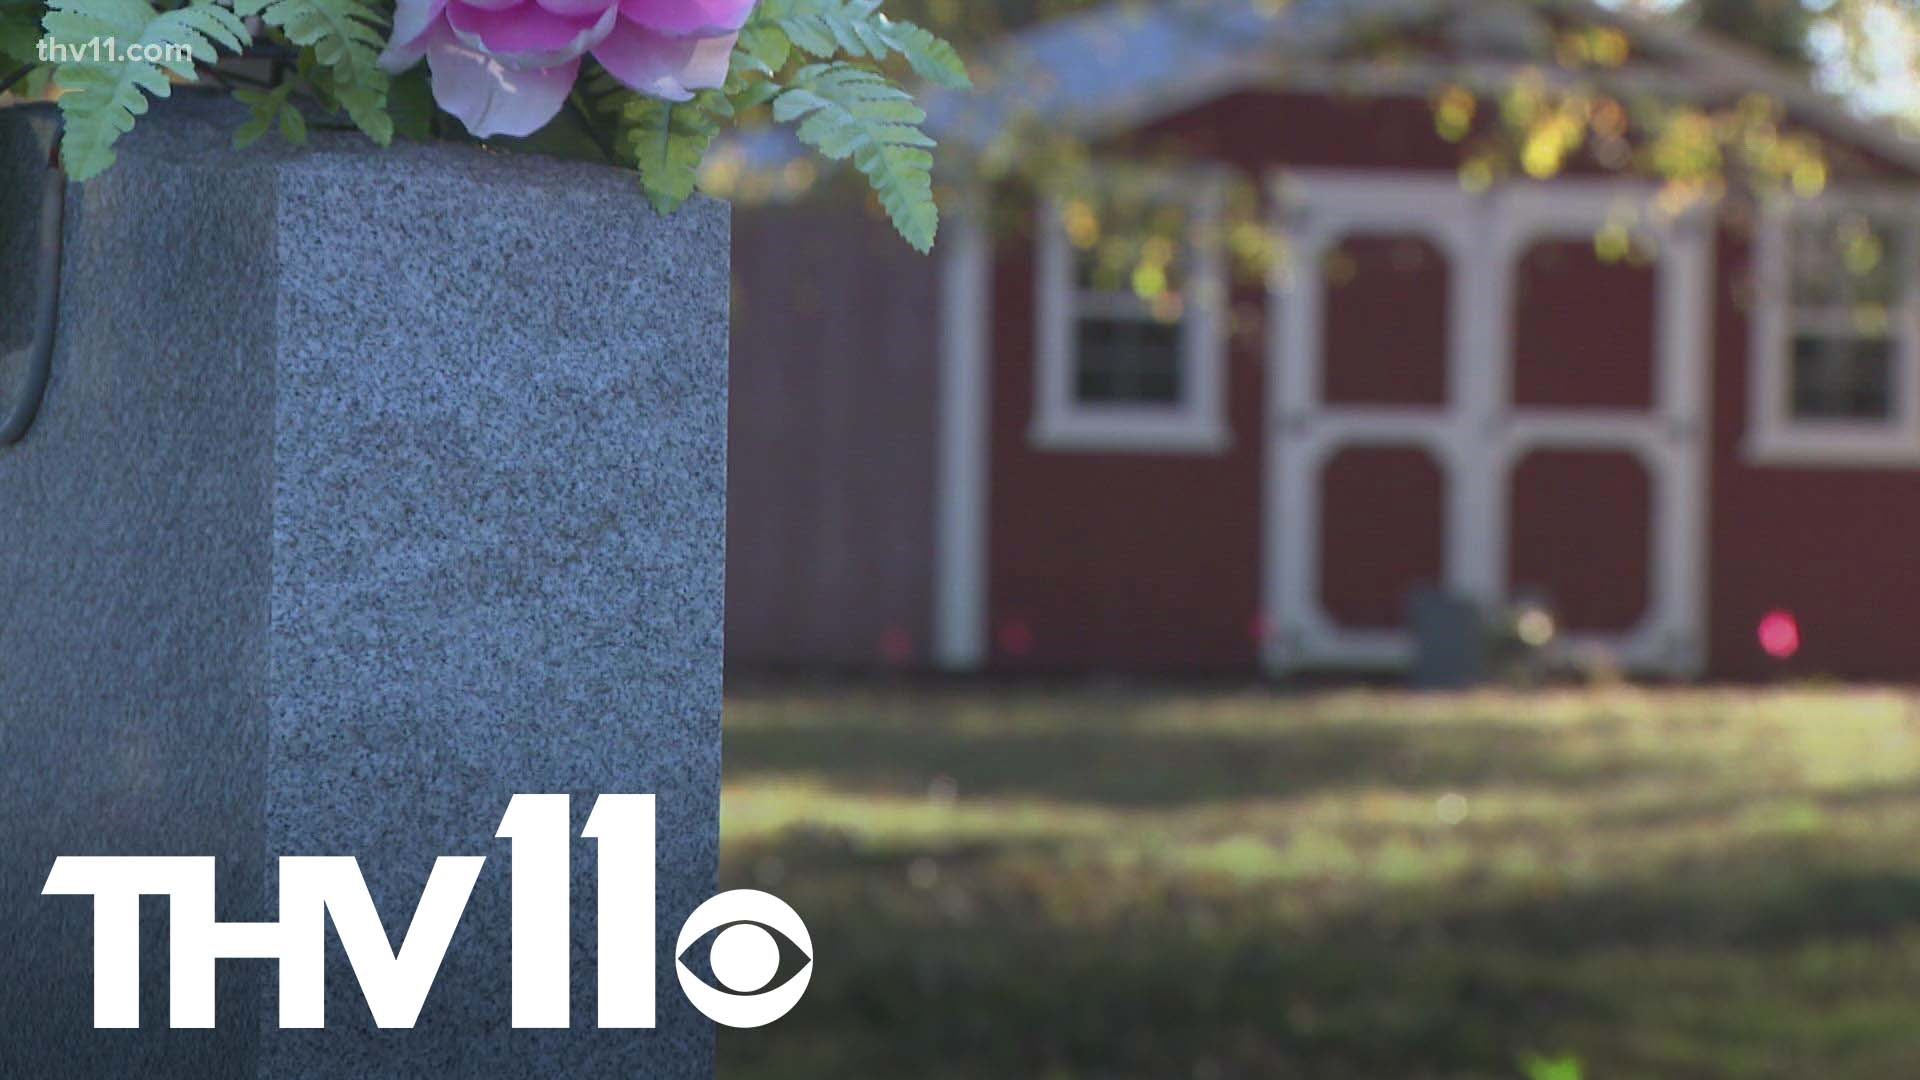 A cemetery becomes the home for many loved ones who have passed... but for one living man, he wants to make it his home too.